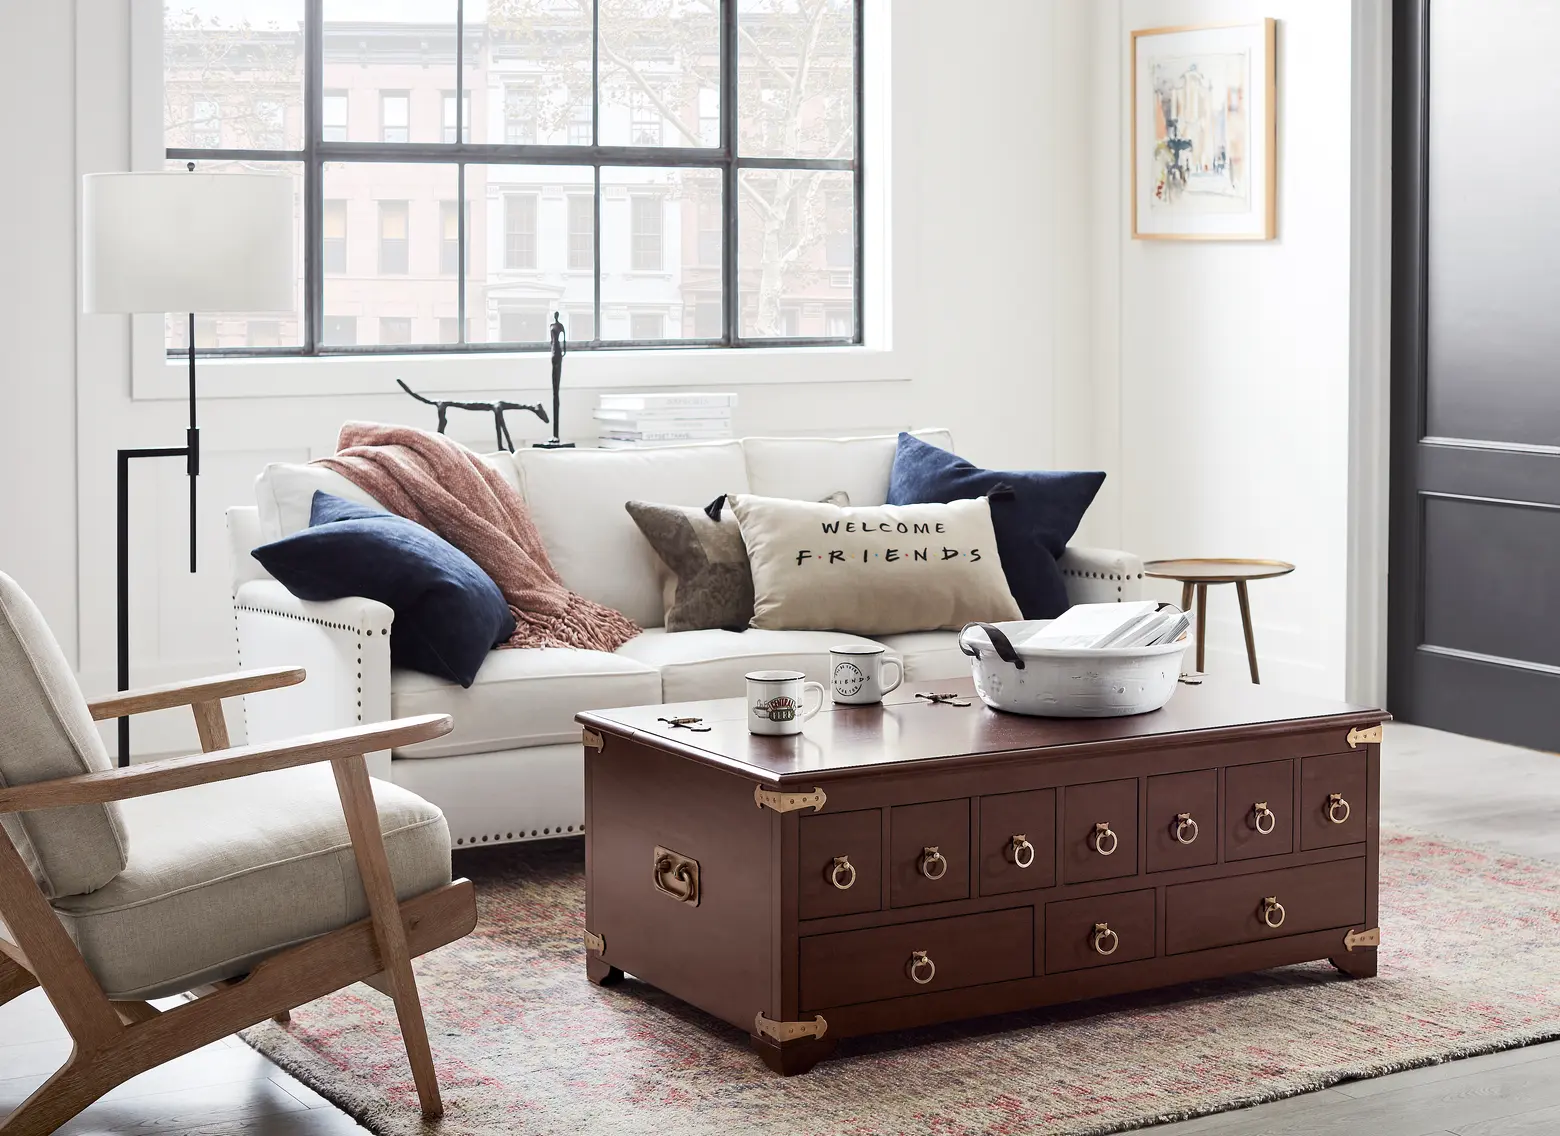 Pottery Barn Launches New Small-Space Line